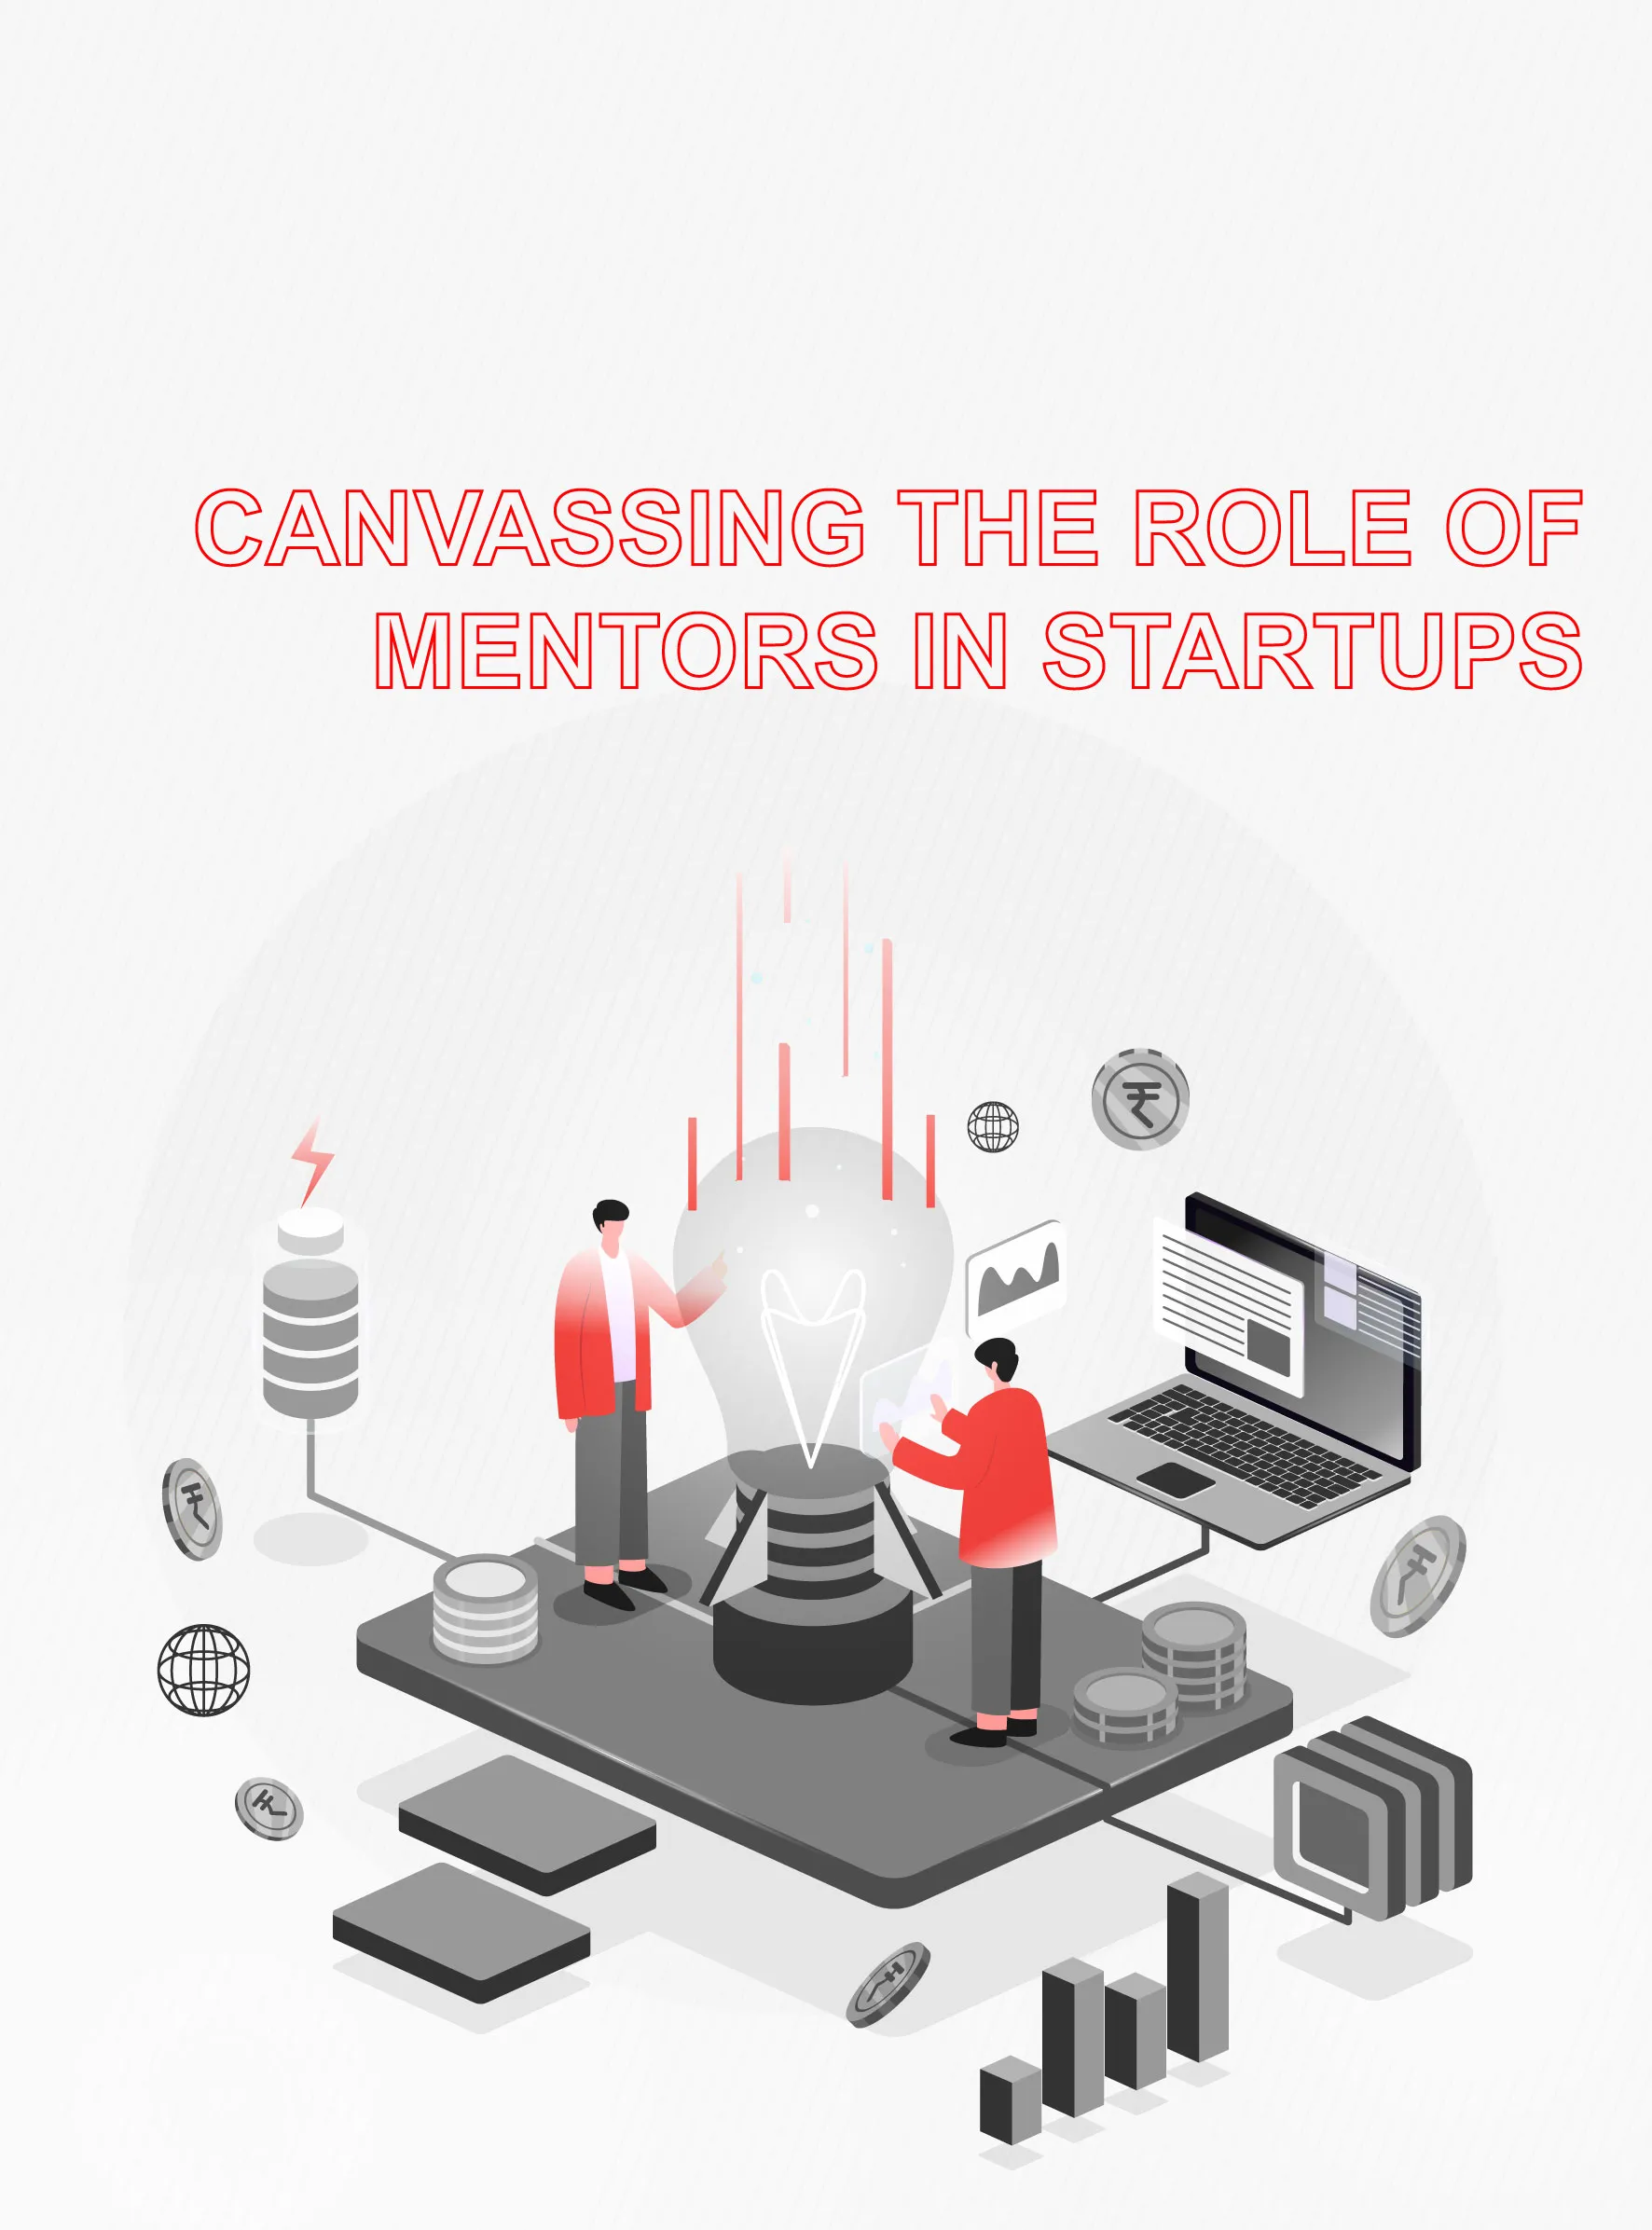 Canvassing the role of mentors in startups